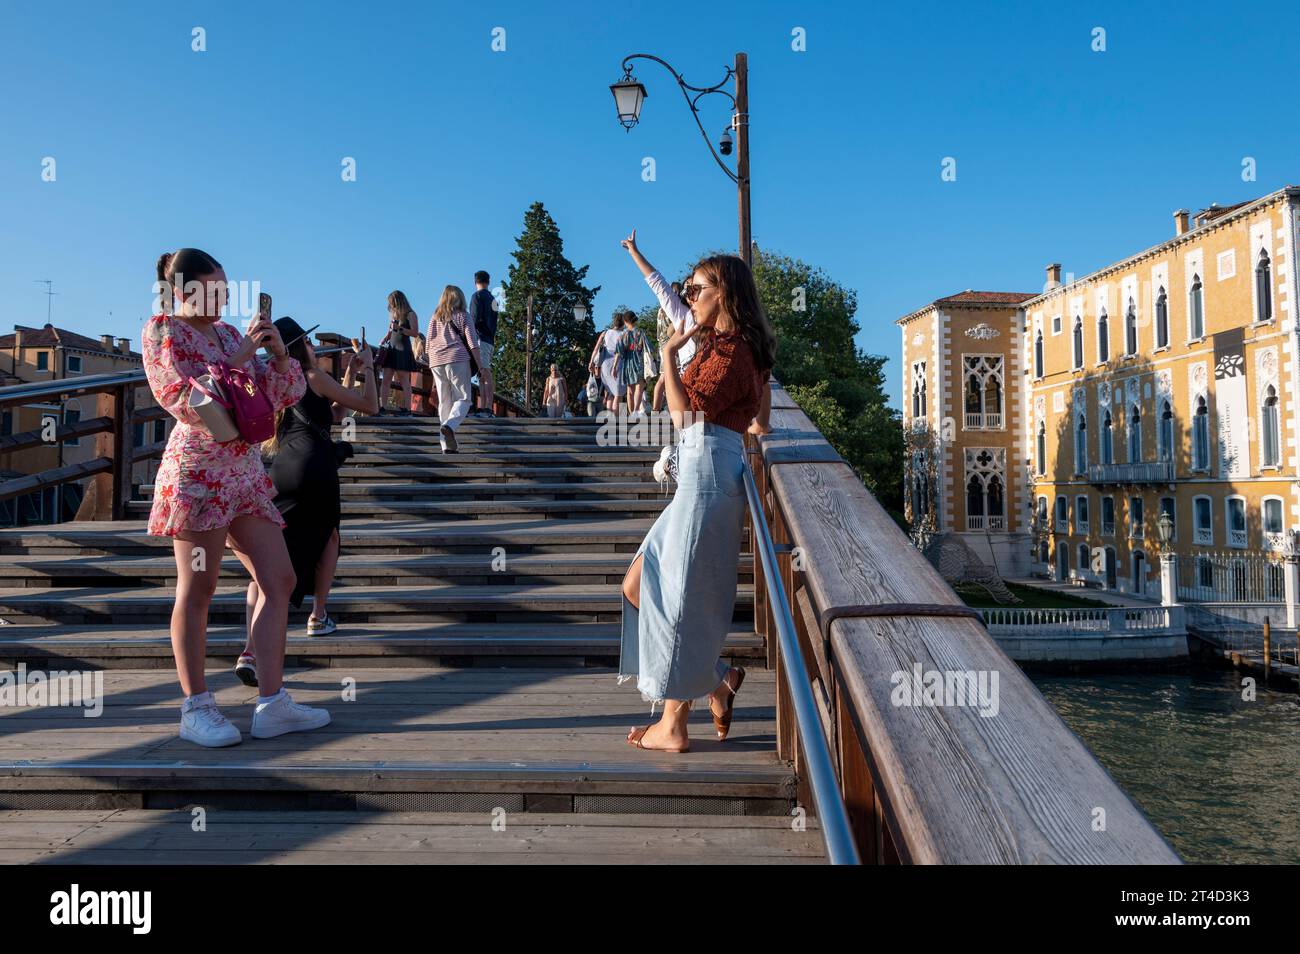 Taking selfies seems to be a favourite pastime, particularly with young tourists in Venice in the Venetian region of northern Italy. Stock Photo